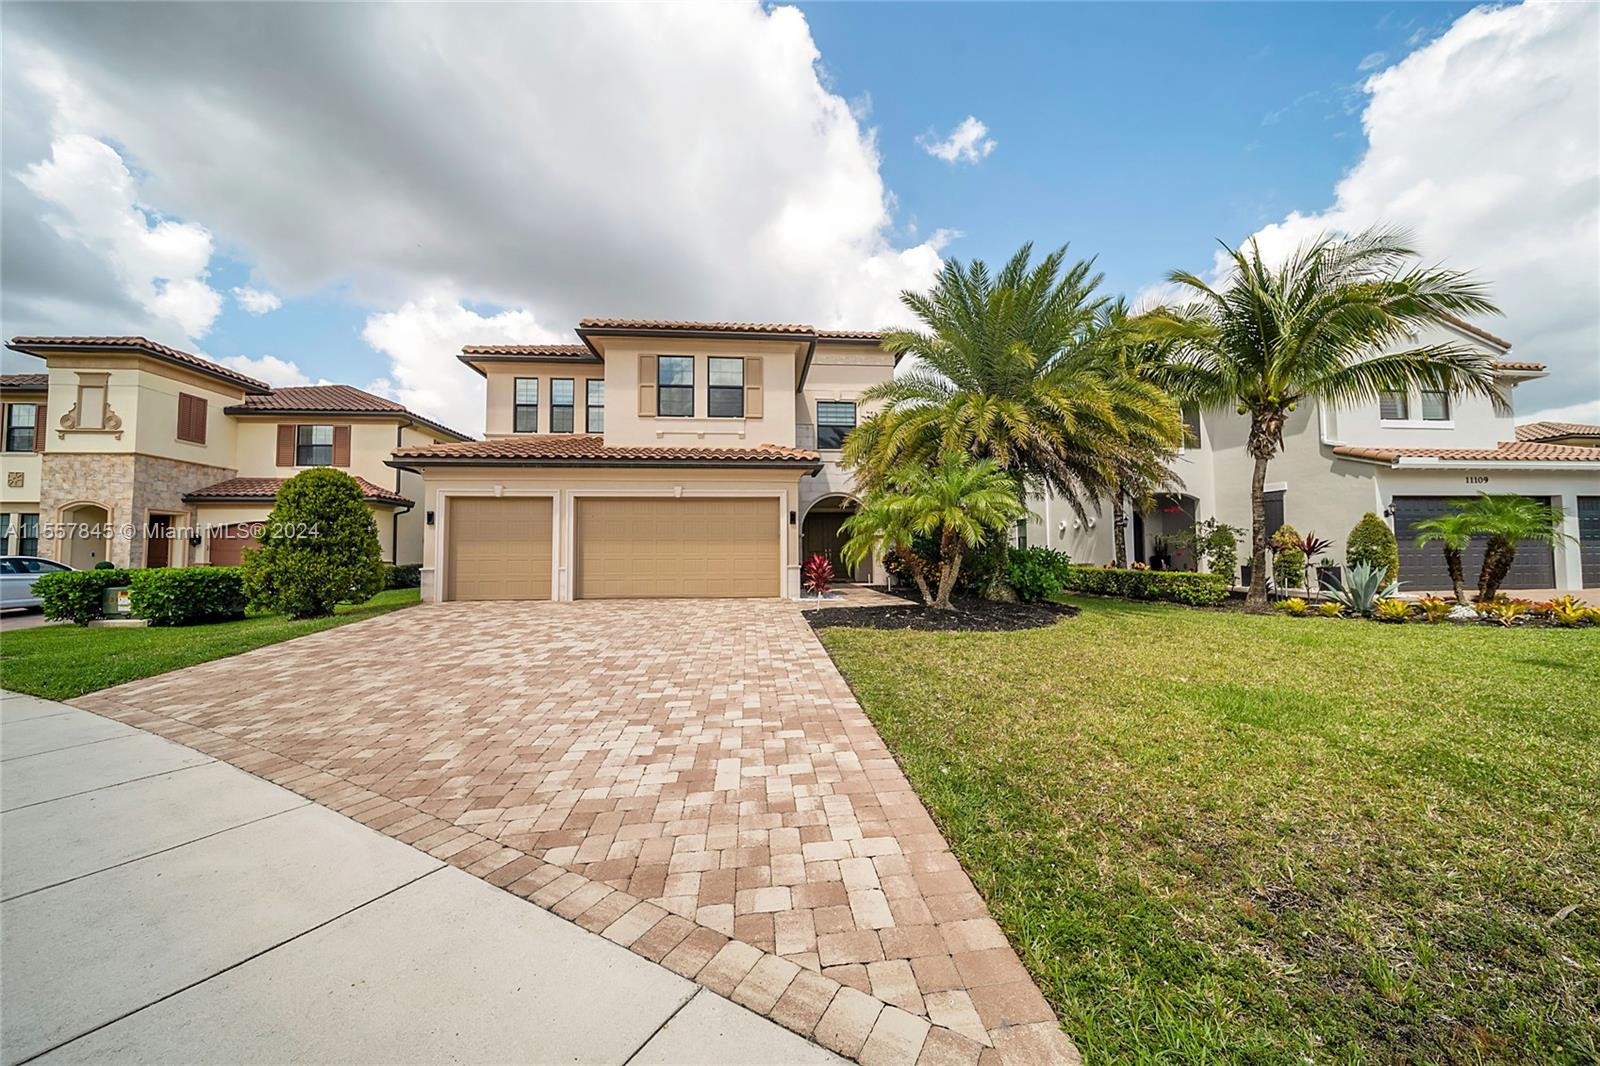 11115 NW 82nd Pl, Parkland, Florida 33076, 5 Bedrooms Bedrooms, ,4 BathroomsBathrooms,Residential,For Sale,11115 NW 82nd Pl,A11557845